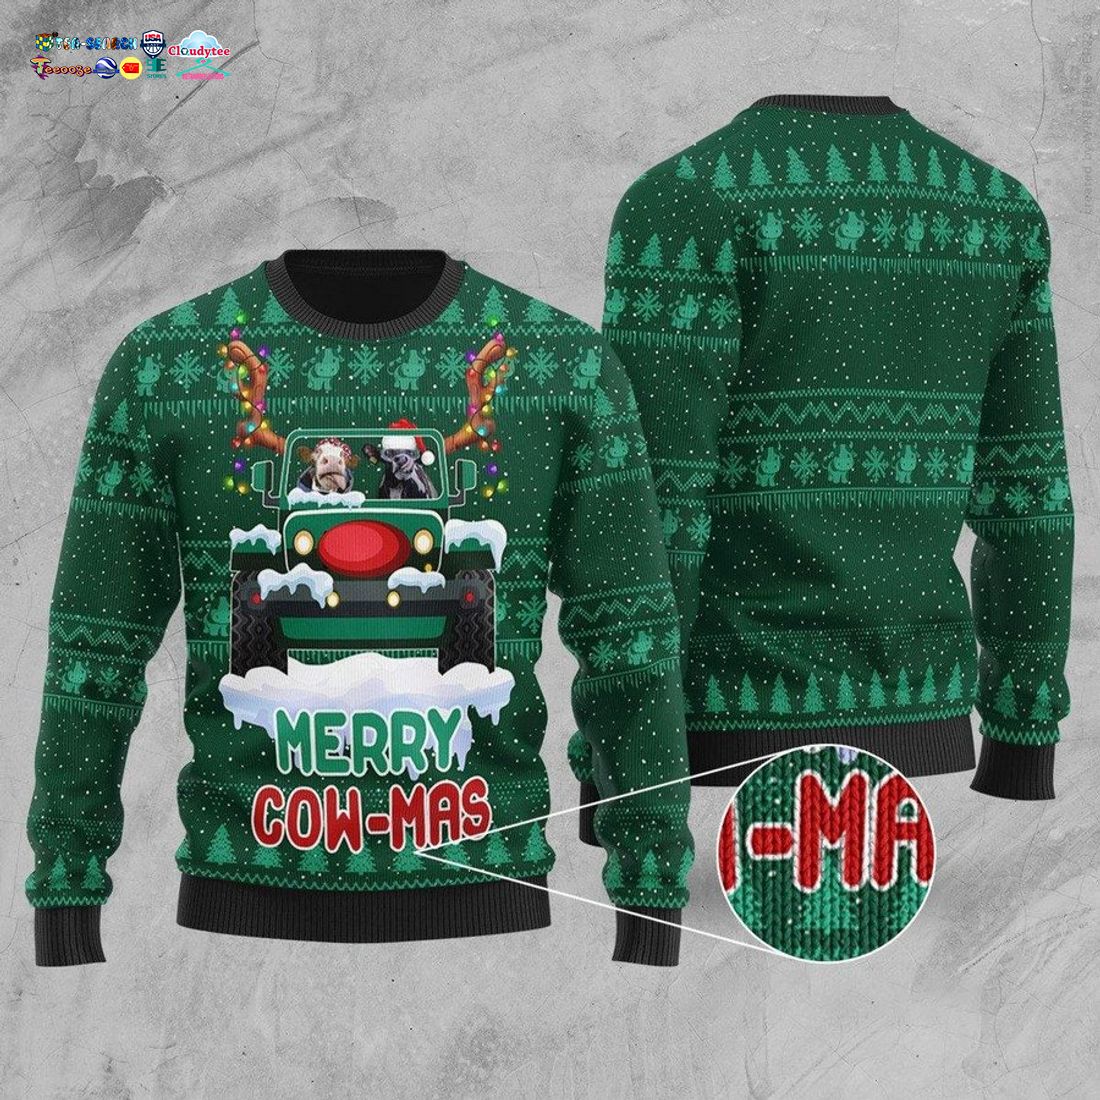 Merry Cow-Mas Ugly Christmas Sweater